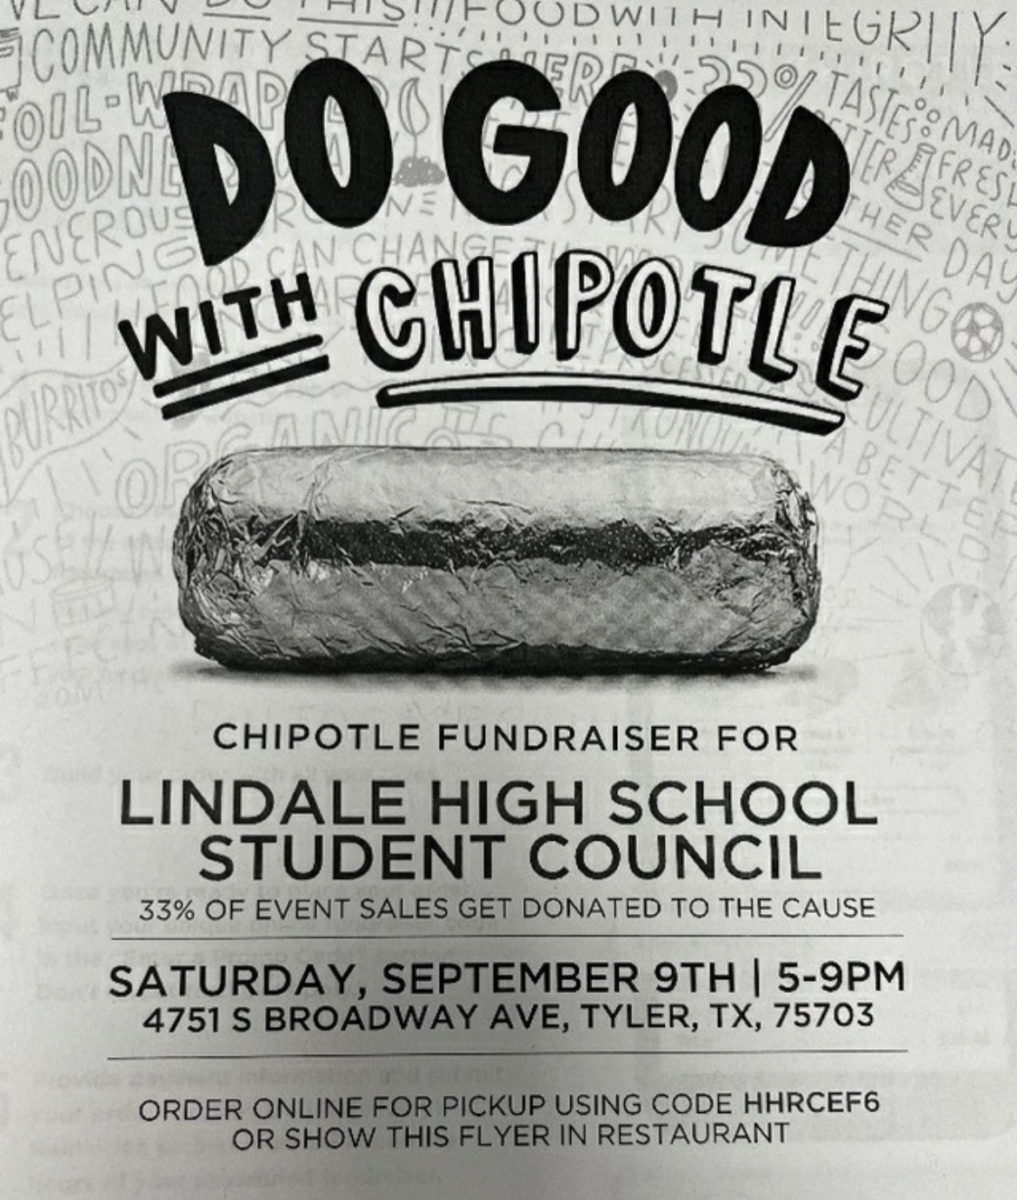 The Chipotle Fundraiser will take place at 4851 Broadway Ave, Tyler TC, 75703. 33 percent of the even sales will get donated to the cause. 